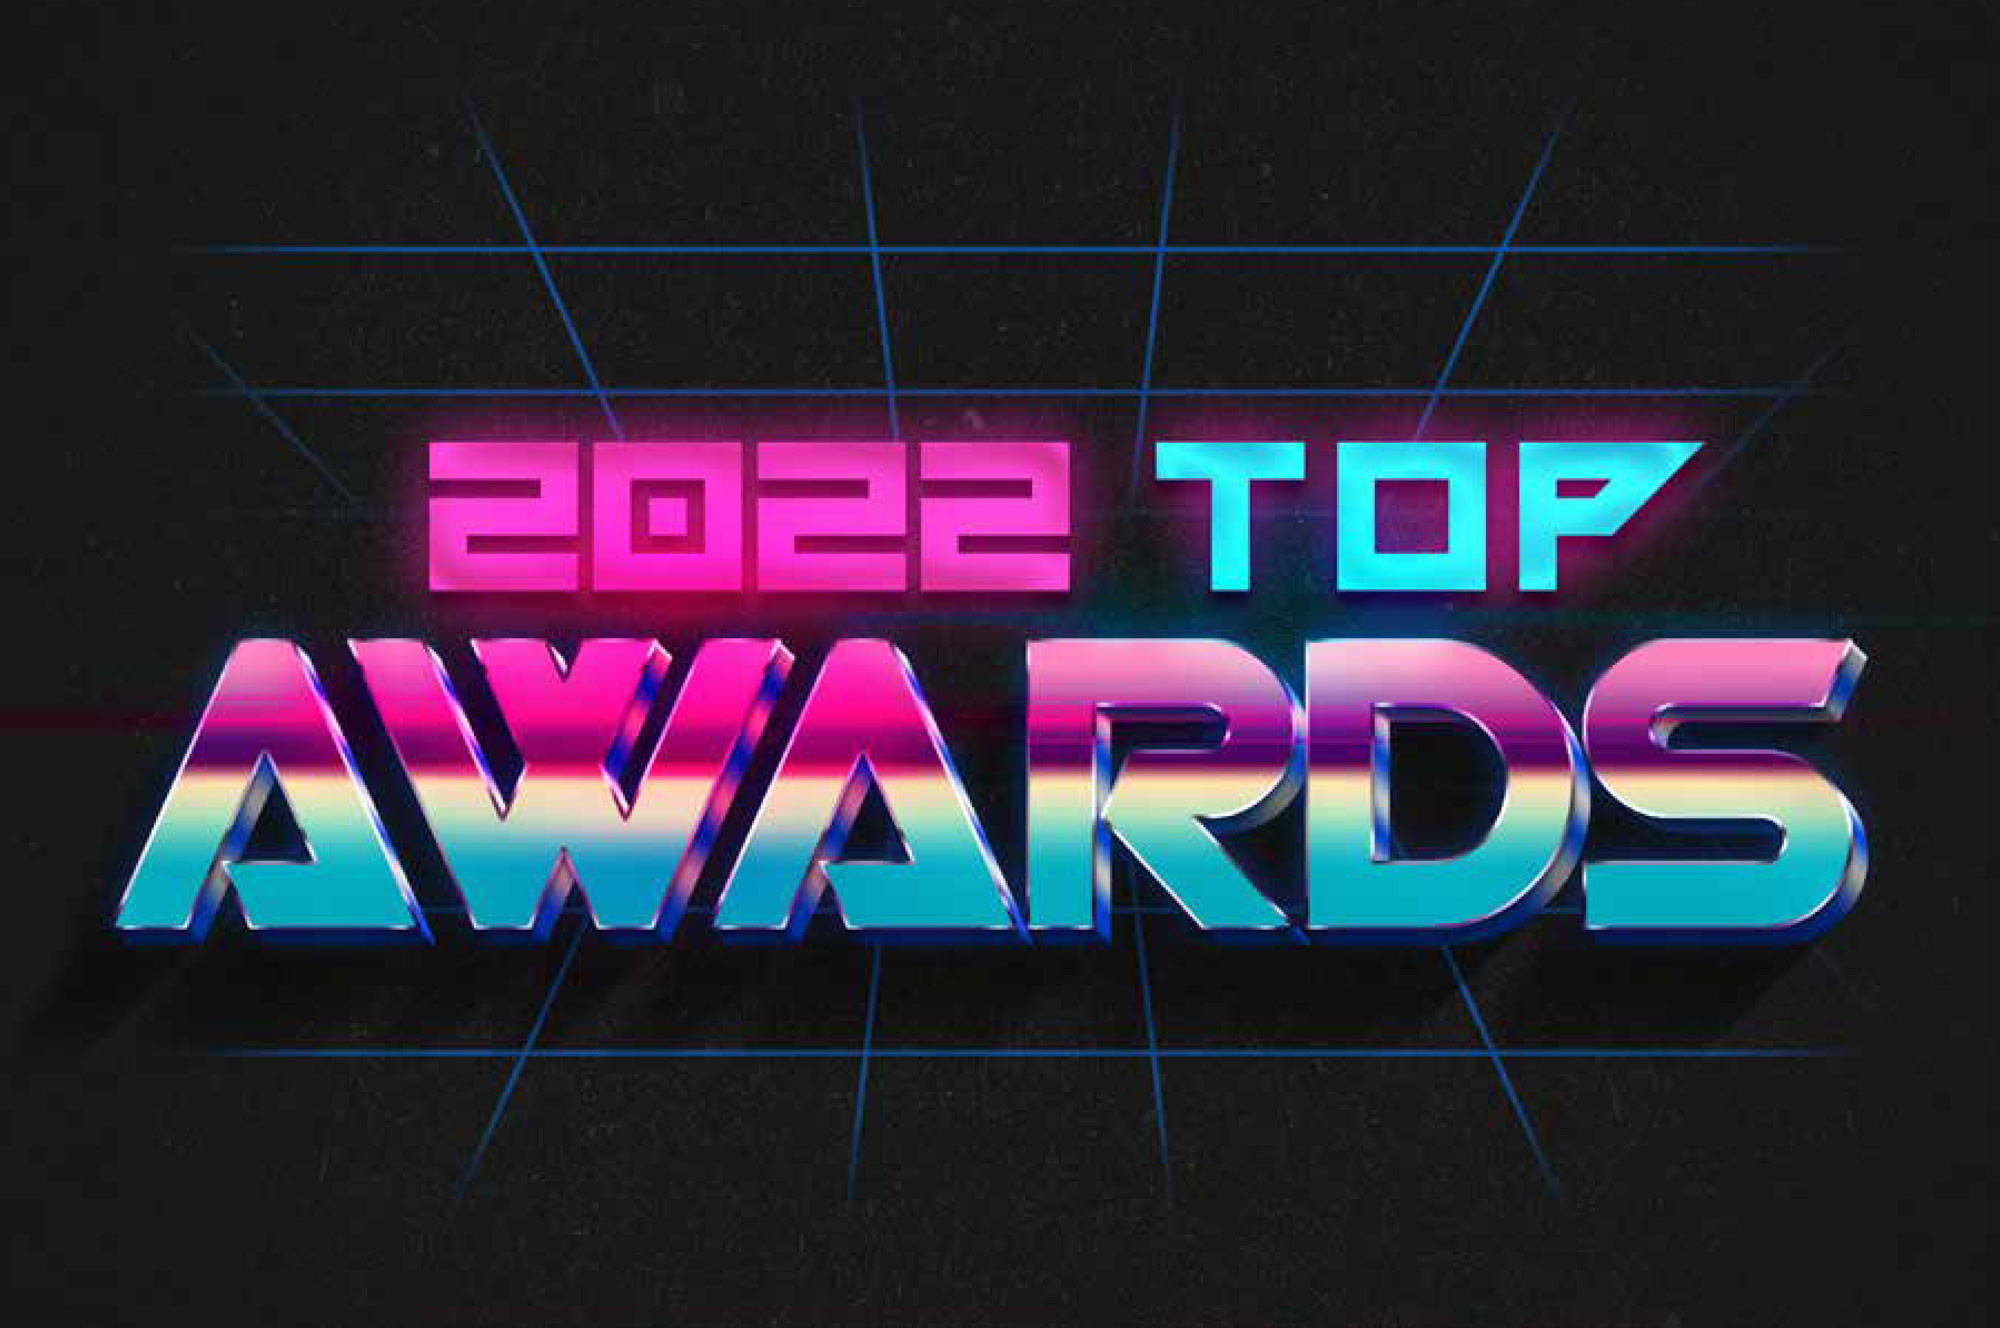 2022 Top Awards graphic